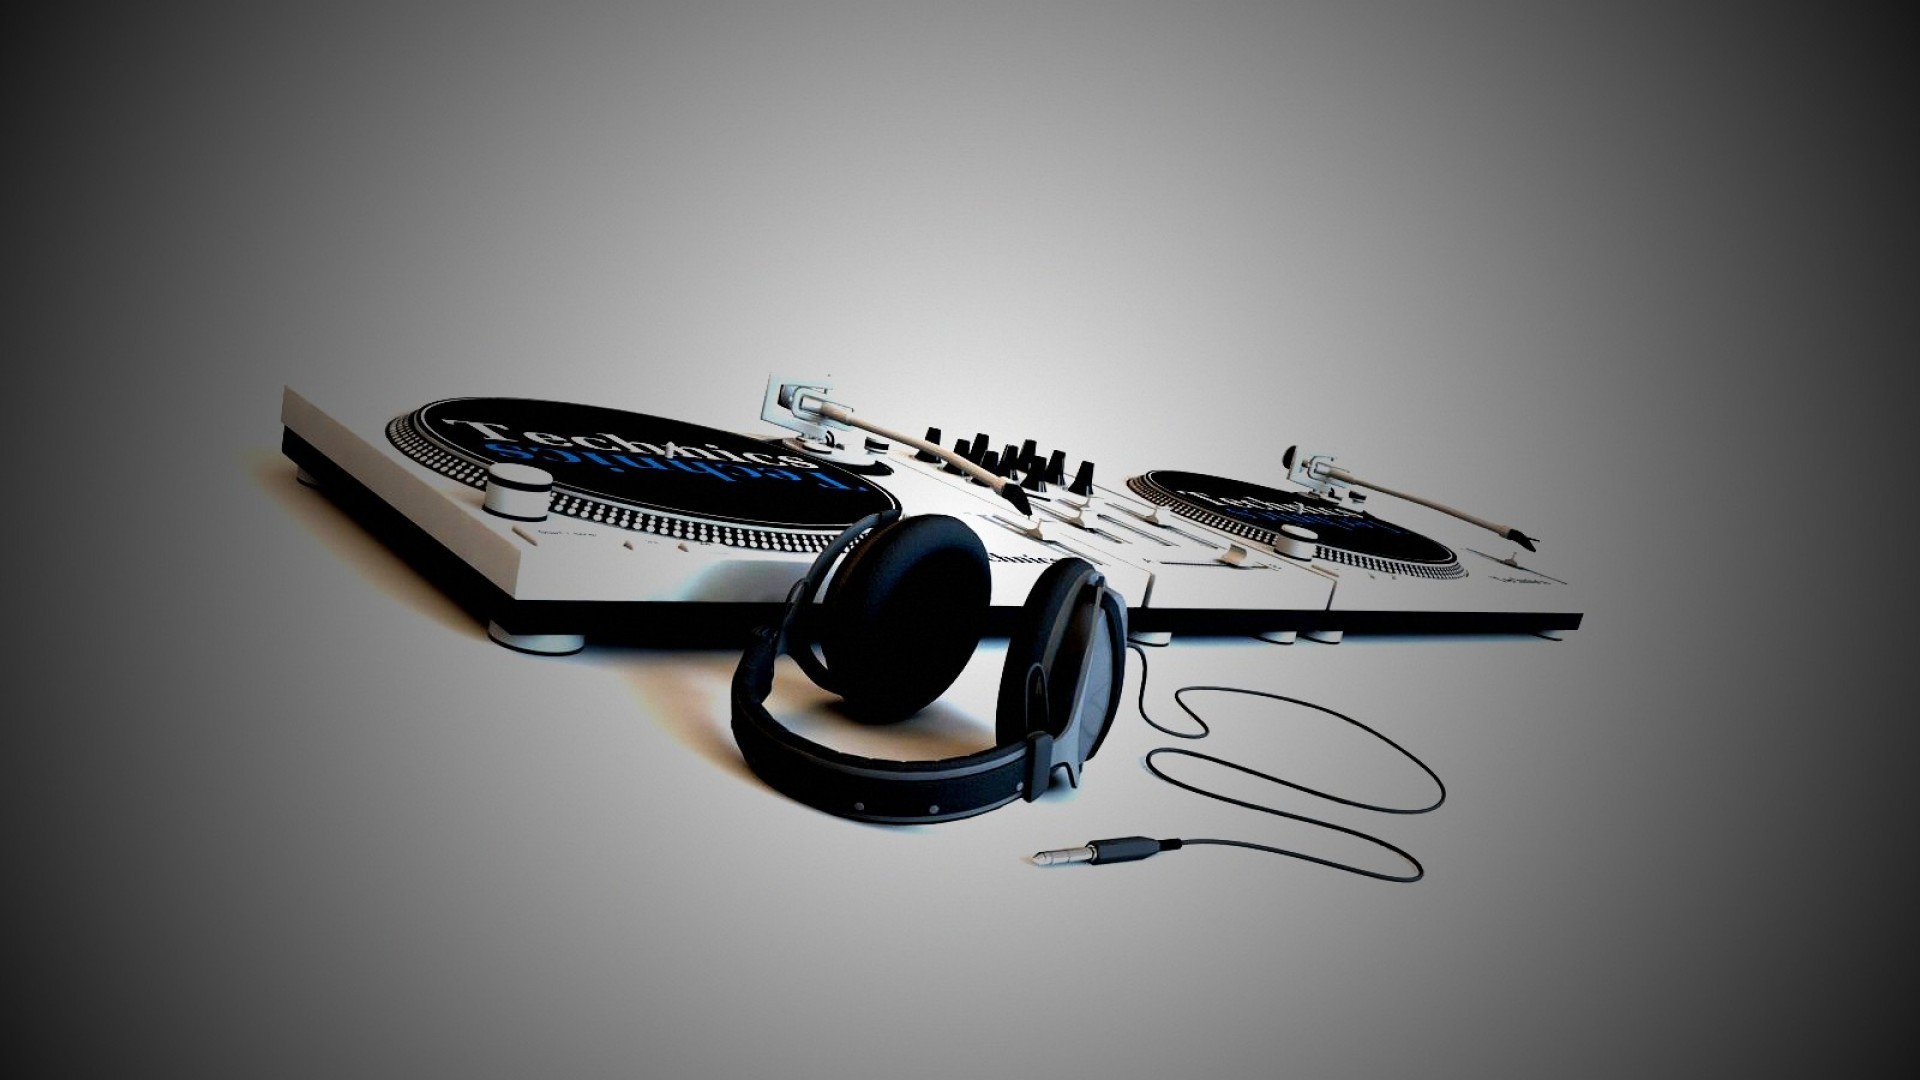 1920x1080 ... wallpapers Photo Collection Music Vinyl Turntables Technics ...